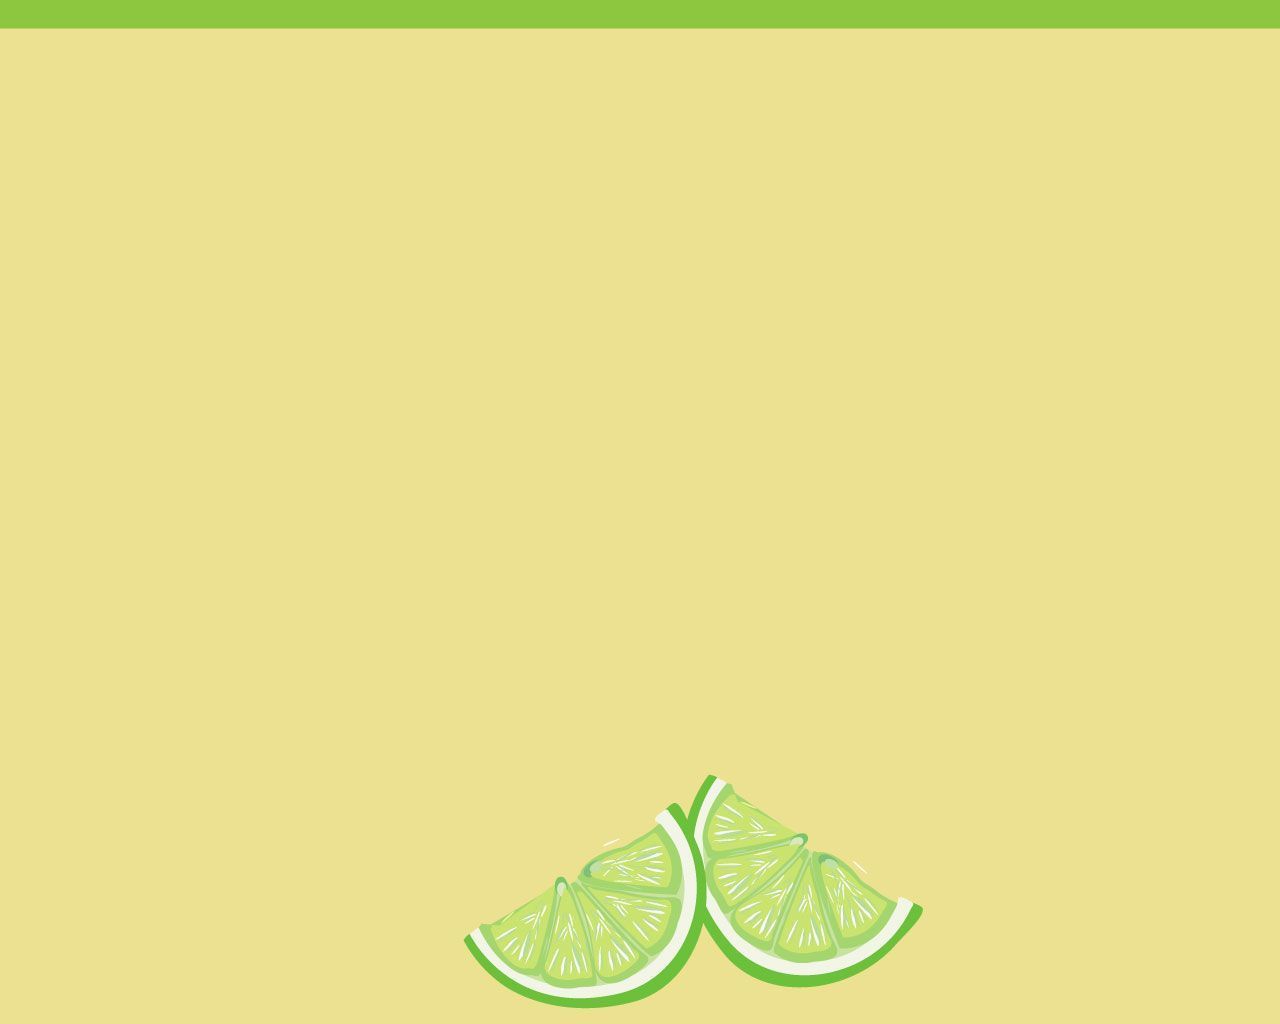 Lemon two slices backgrounds wallpapers